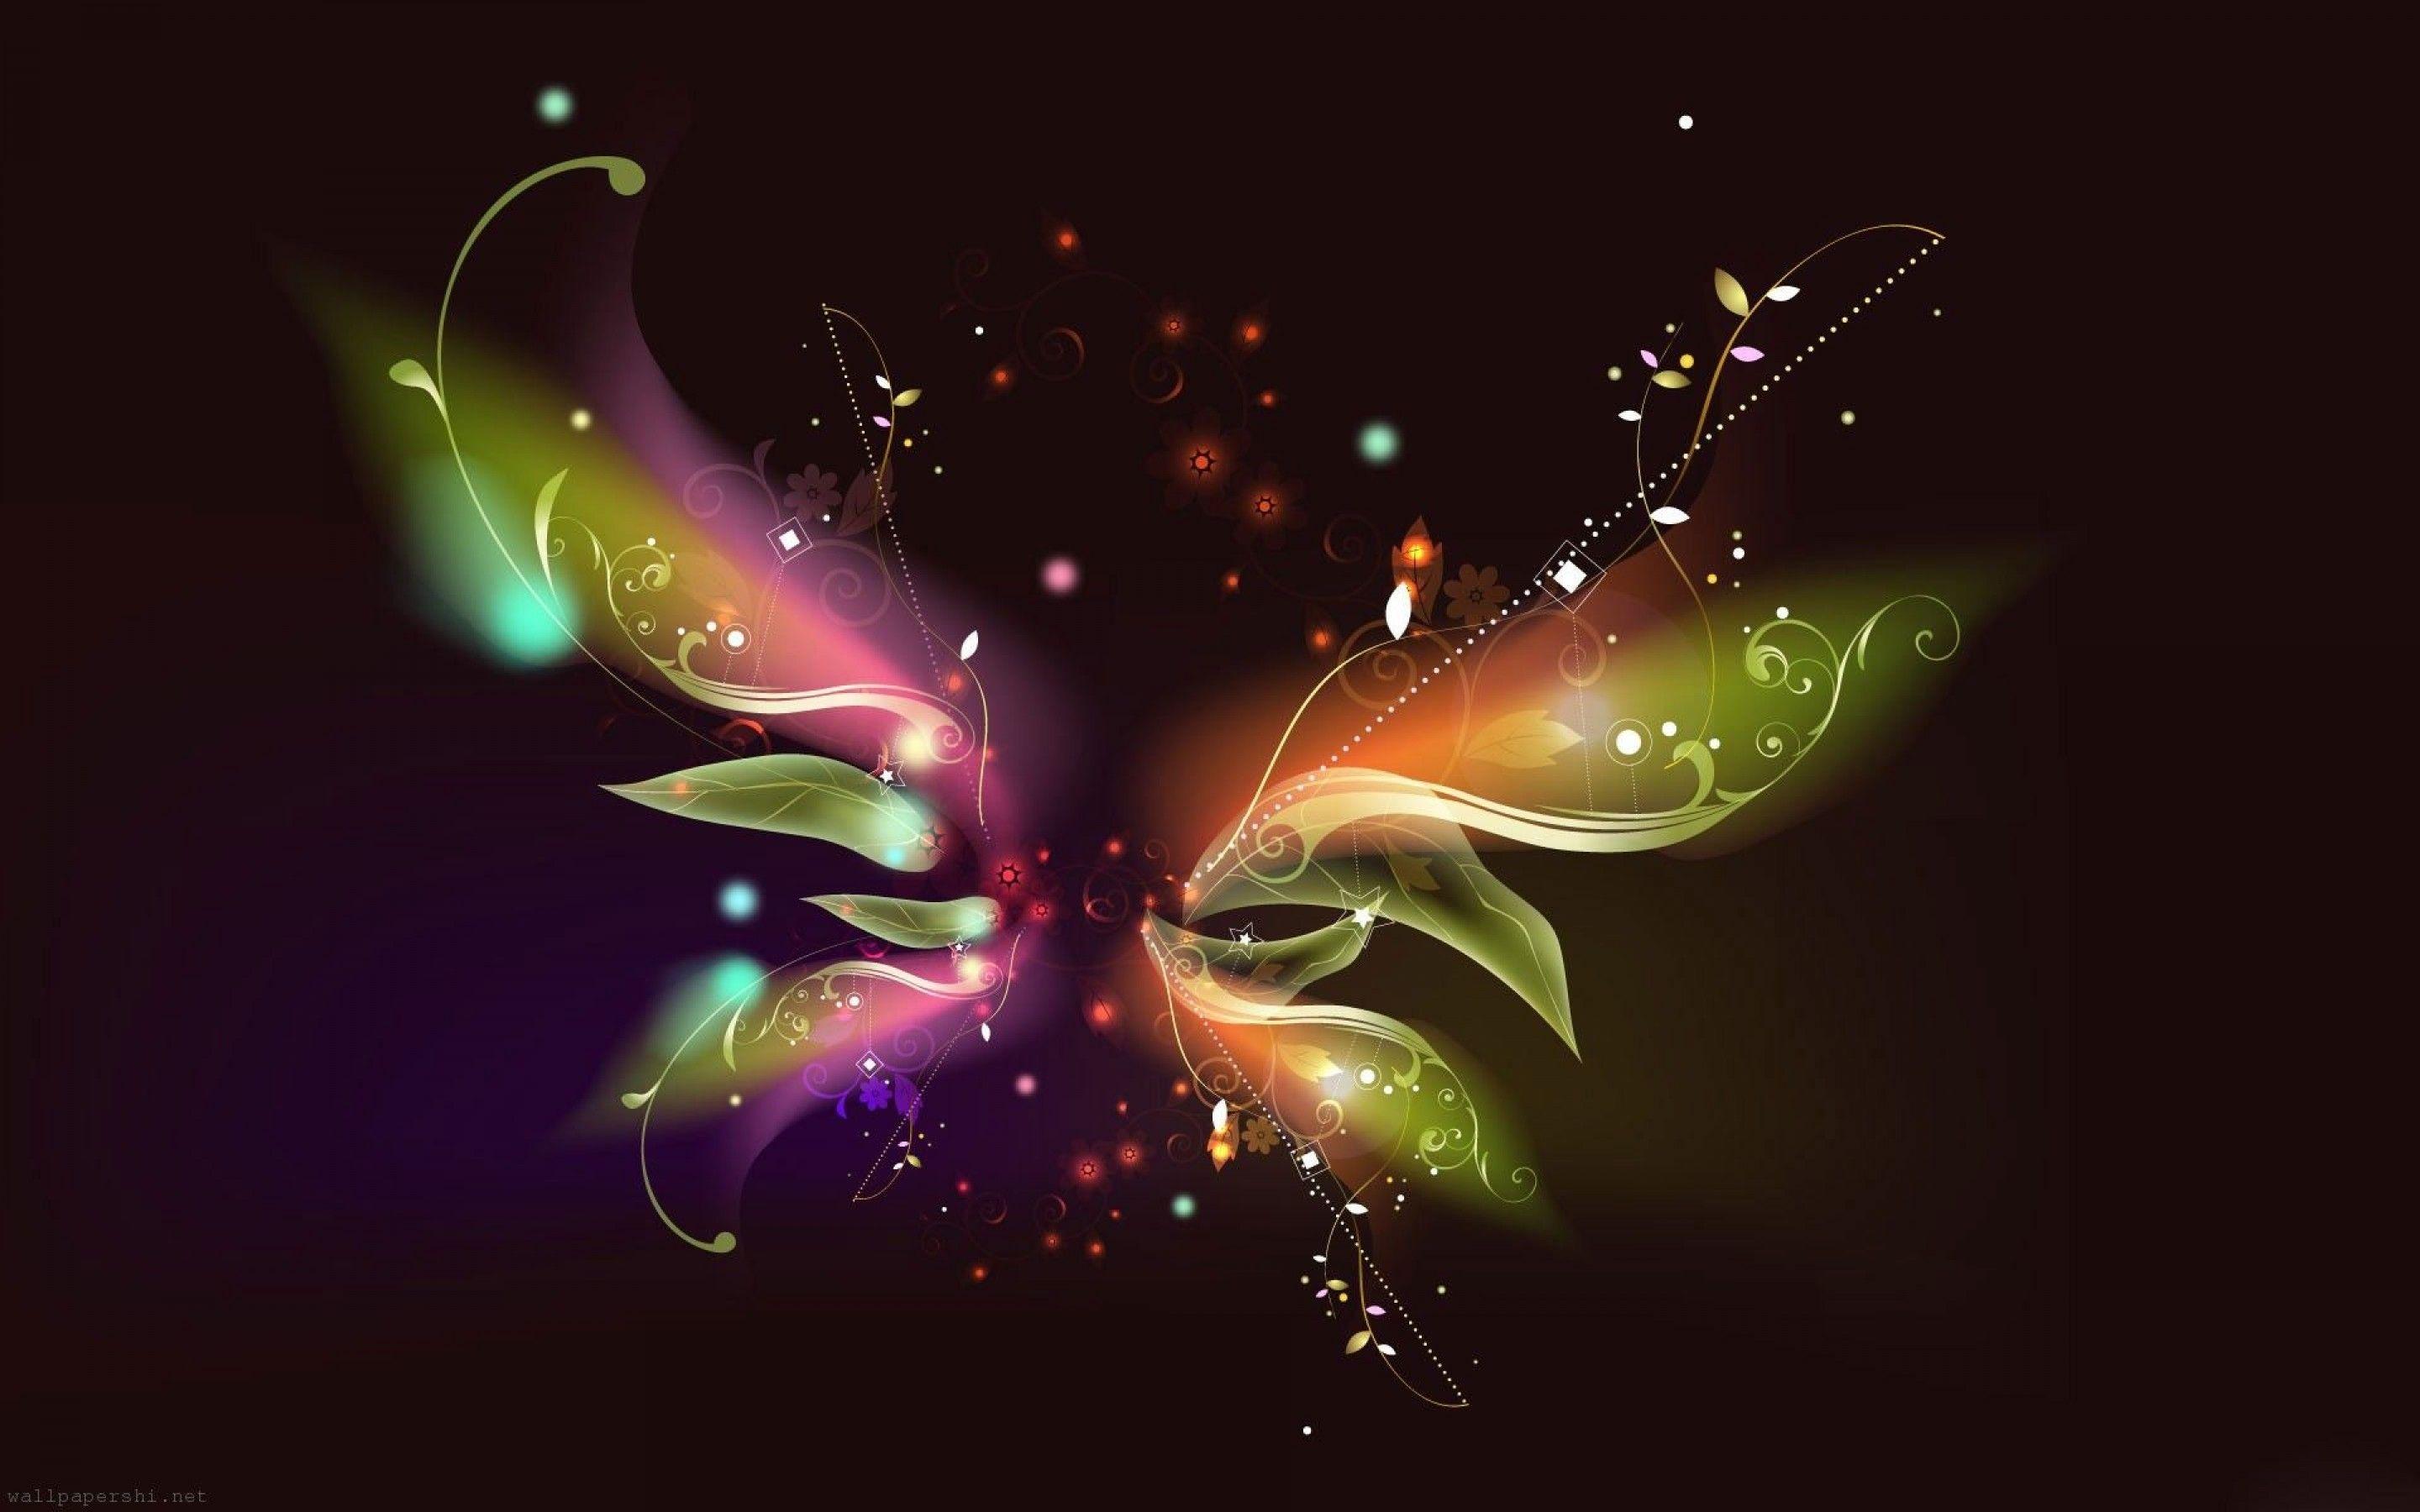 Beautiful Butterfly HD Wallpaper and Image Download Free